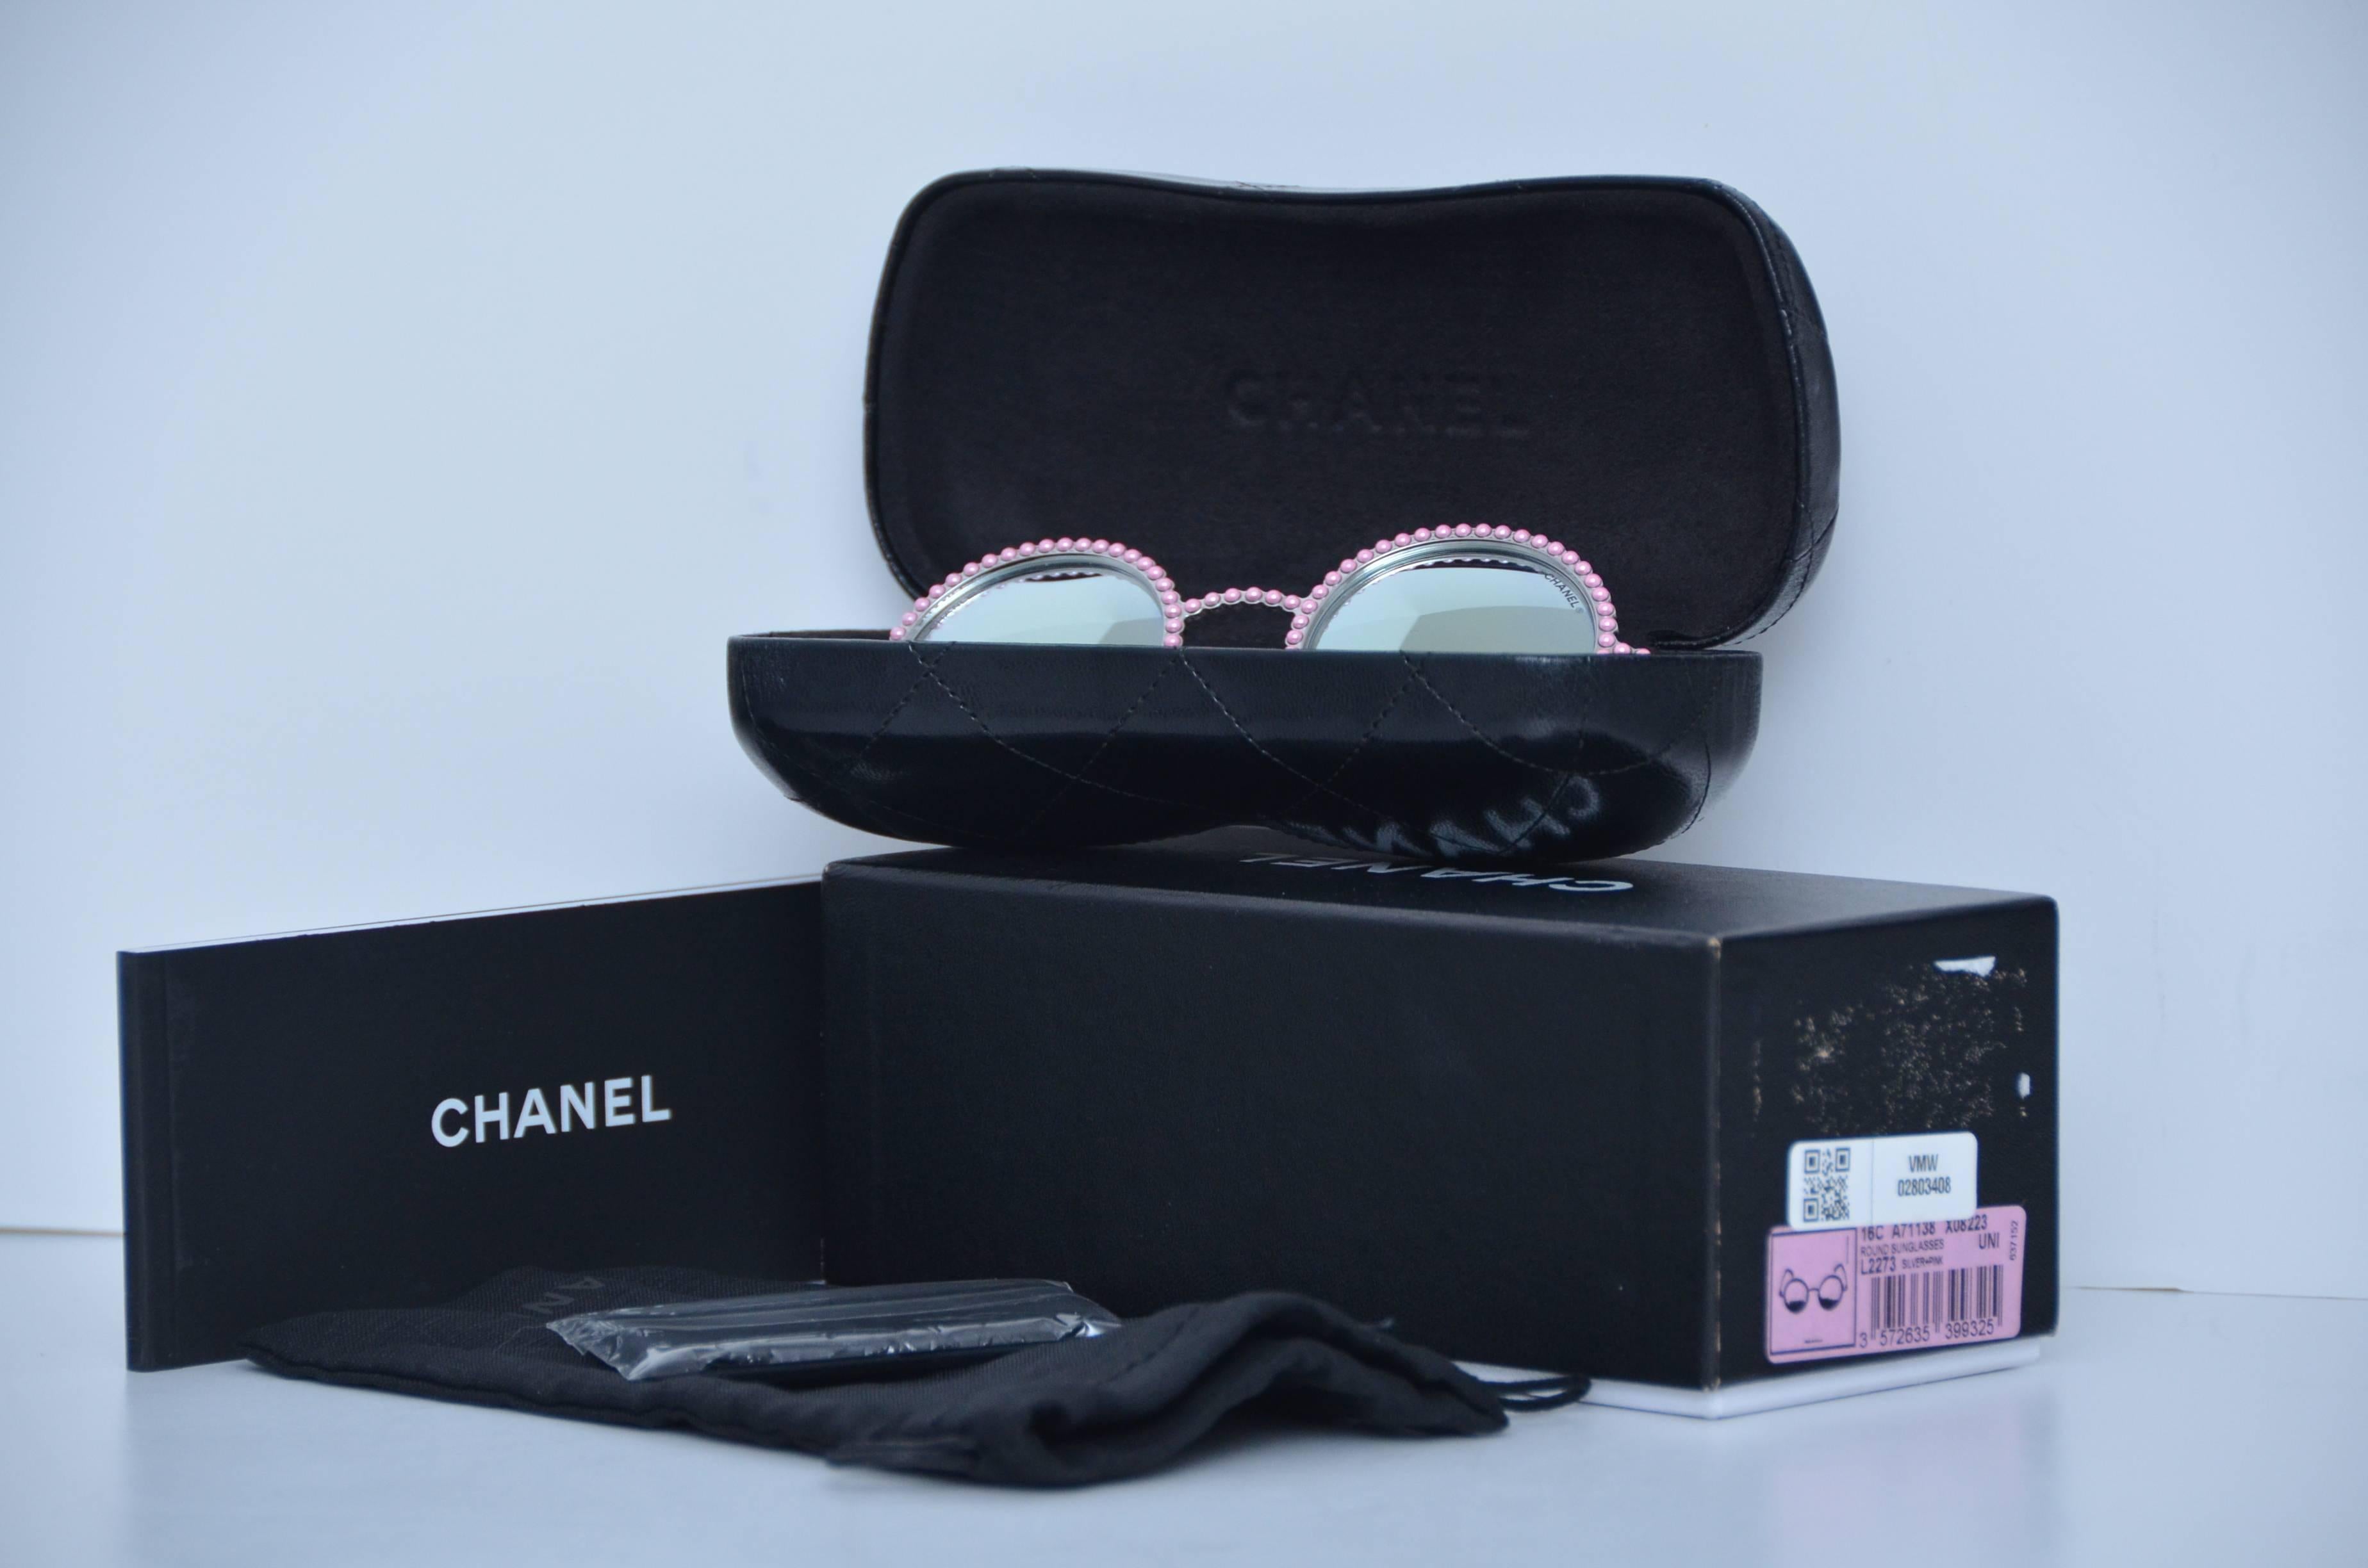 CHANEL pink pearl embellished and advertised by Rose Depp for Chanel.
Brand new with case,original case and box .
Copy of original receipt available.
Made in Italy.
Lenses are mirror reflective pink tone color.

Sold out everywhere!

FINAL